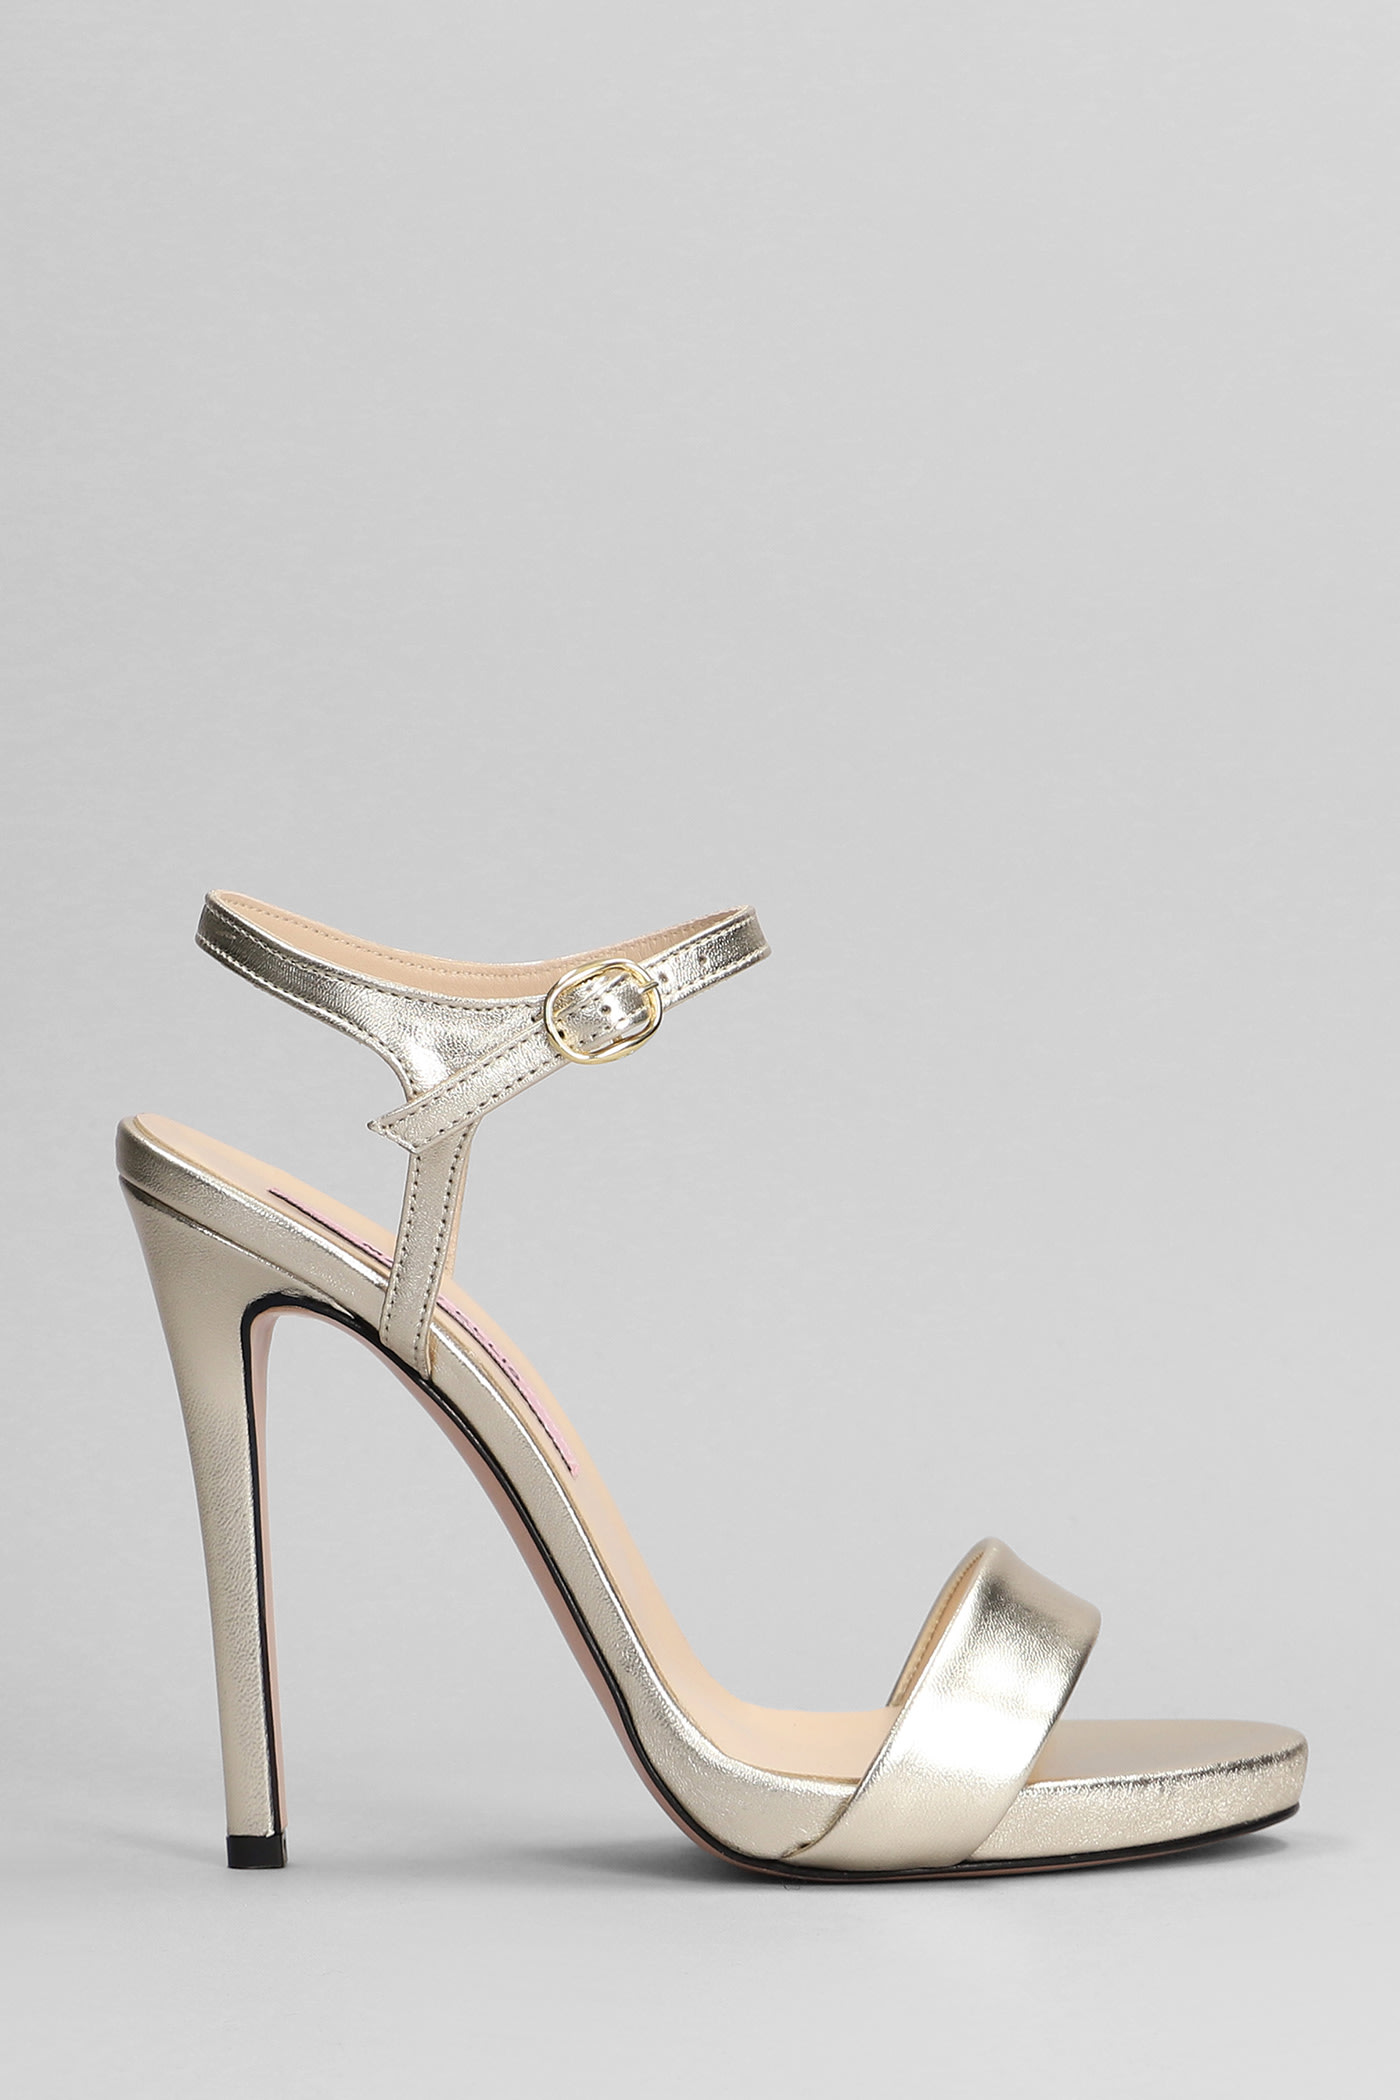 Vivace Sandals In Gold Leather